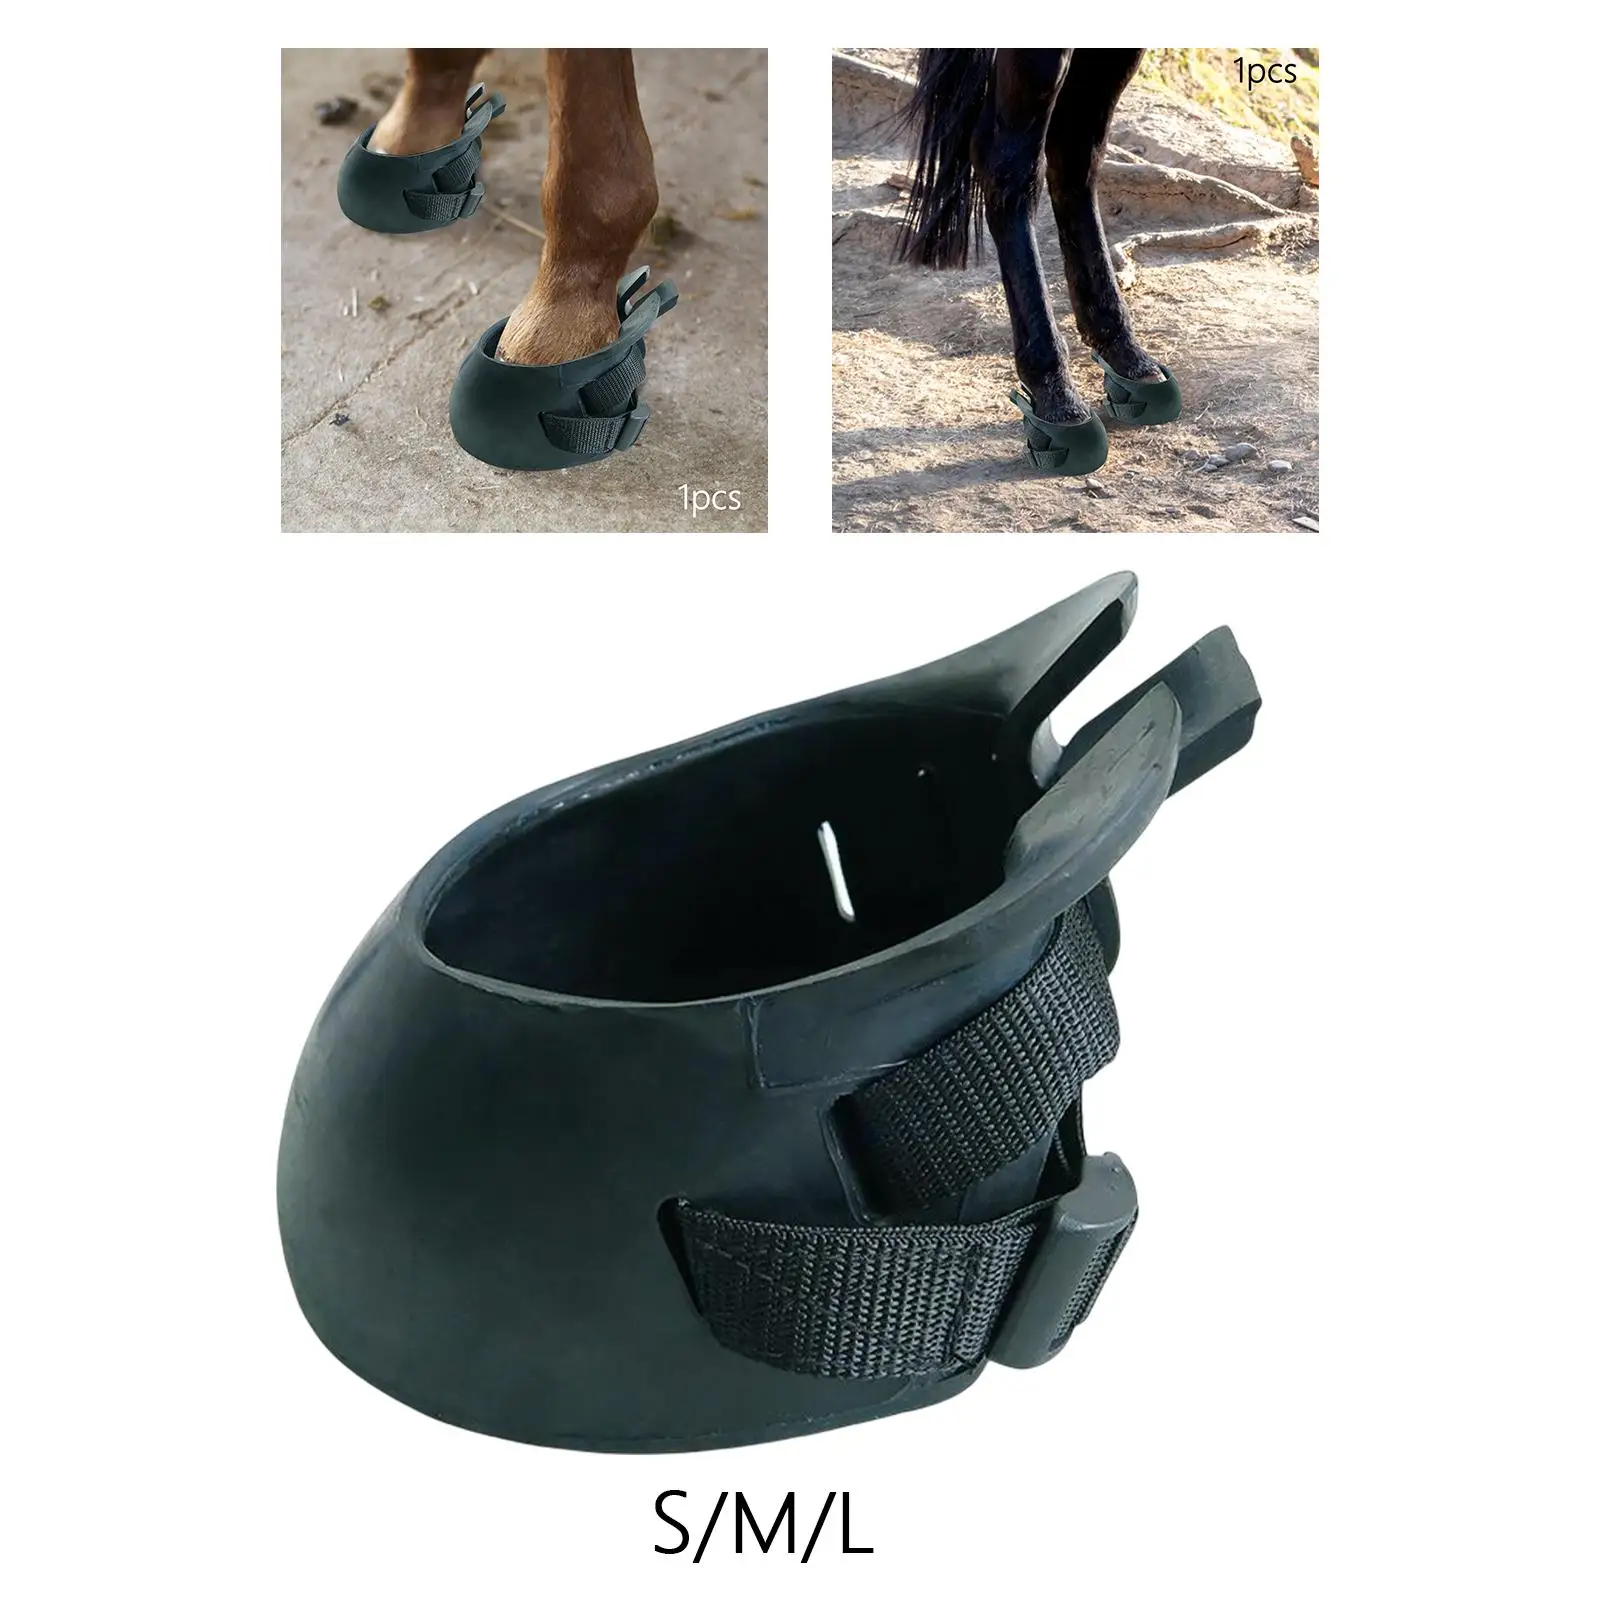 Rubber hoof boots, durable, wearable, protect, thick, non-slip, horse protection